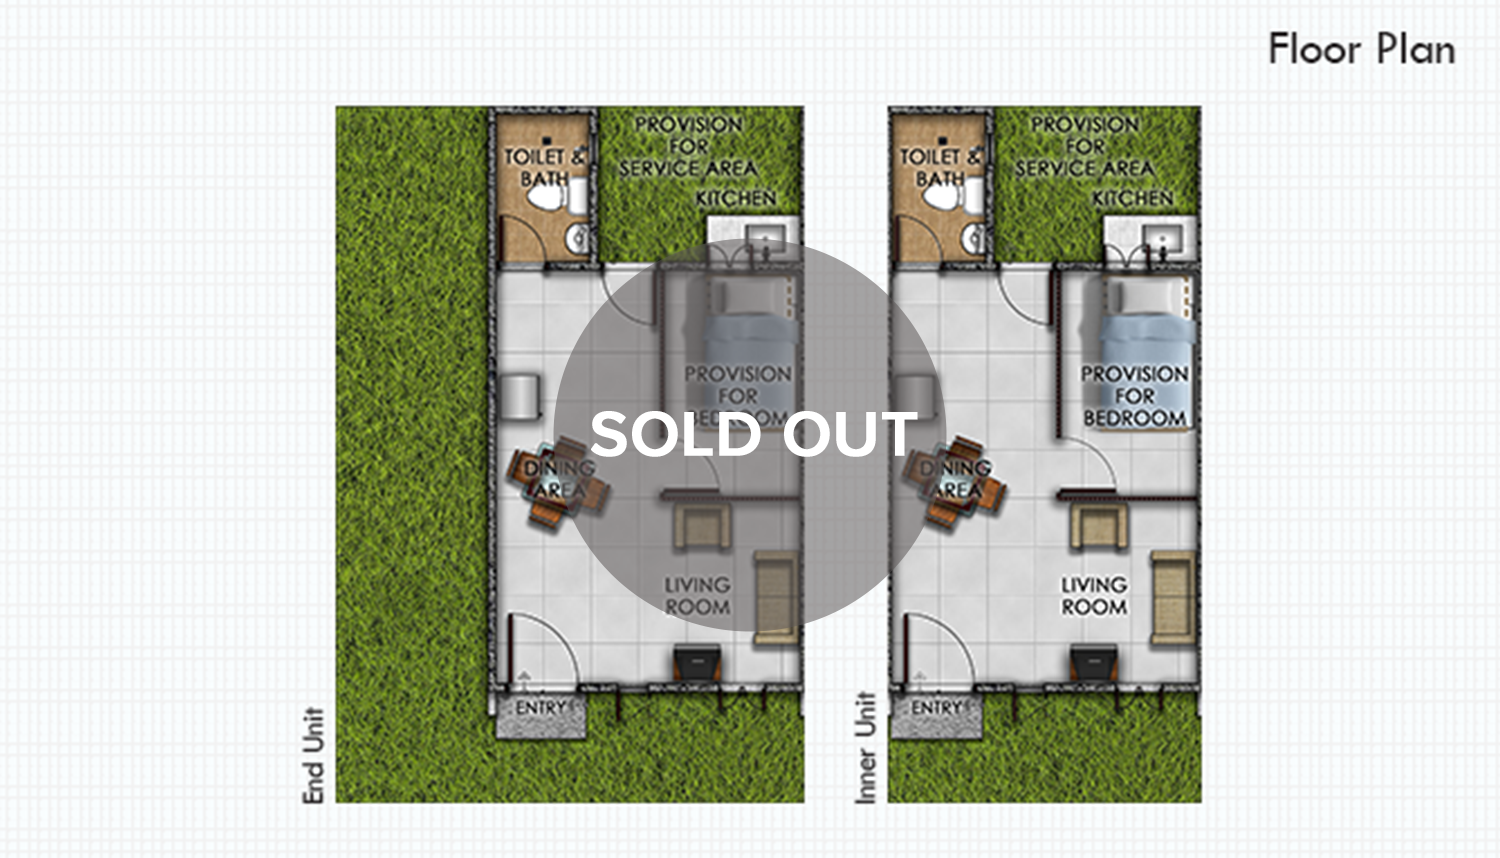 /assets/properties-house-model-gallery-and-landmarks-icons/lumina-home-models/home-model-gallery/anna-rowhouse/lumina-anna-rowhouse-floor-plan-sold-out.png